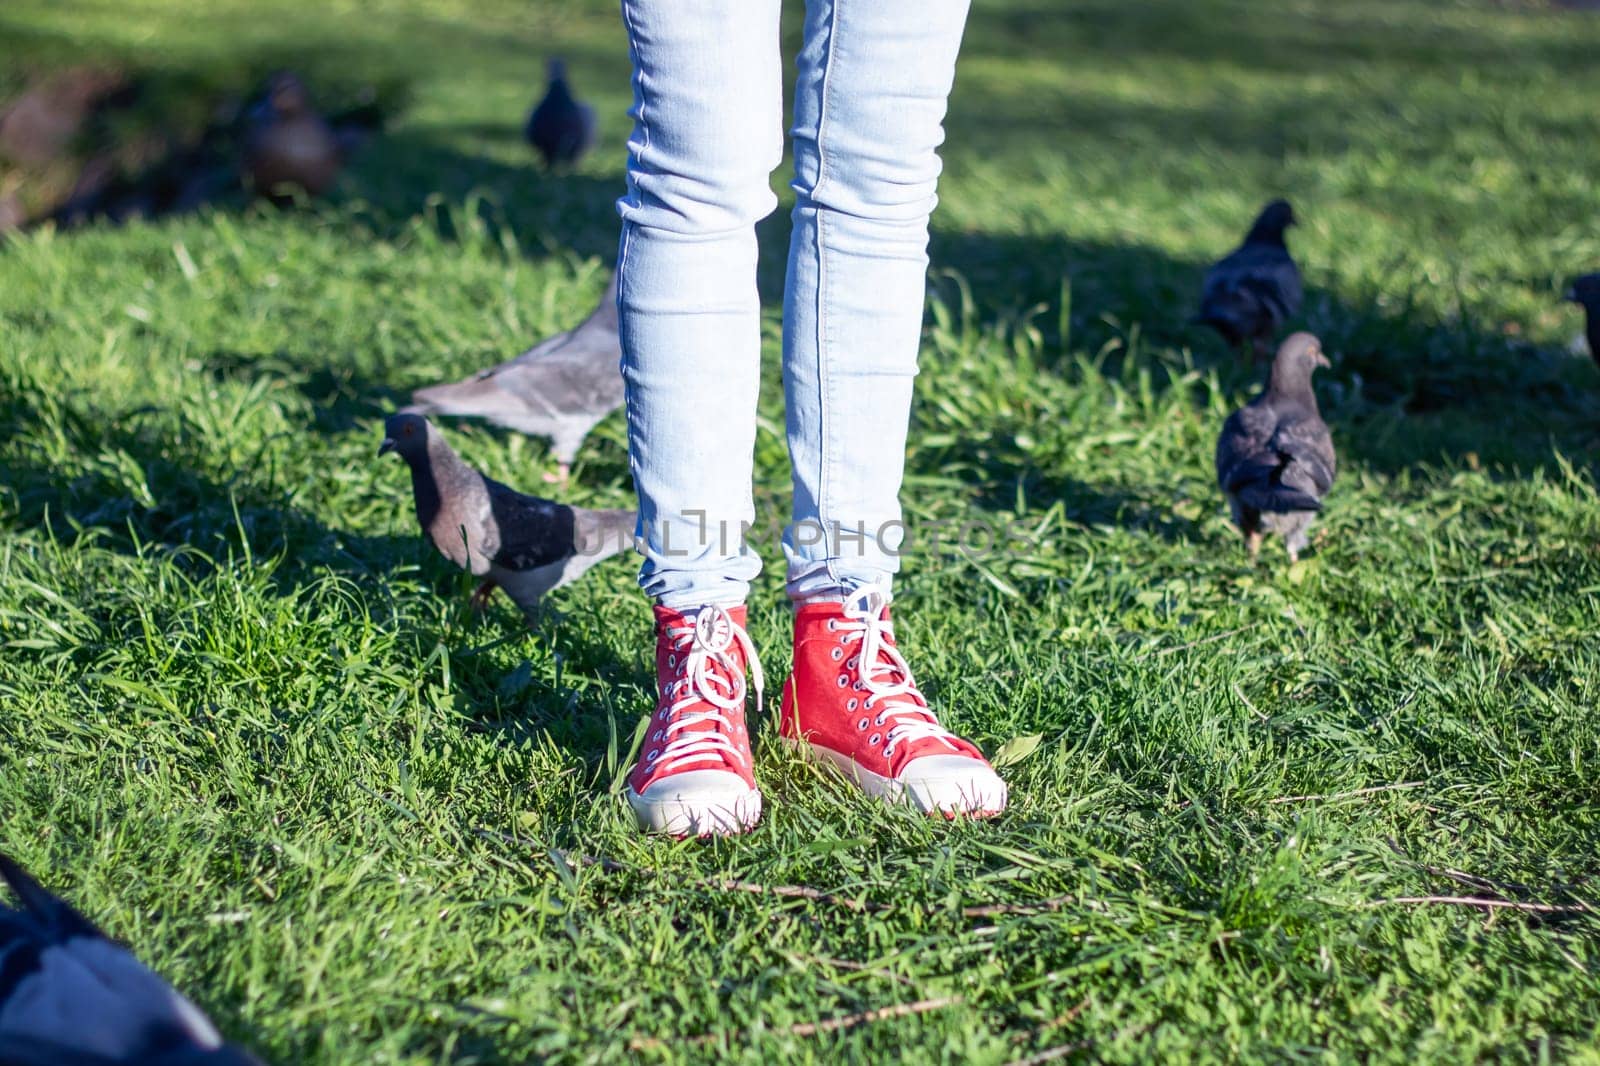 A person in jeans and red shoes is standing in the grass surrounded by pigeons under the sunlight, with green plants and leaves around